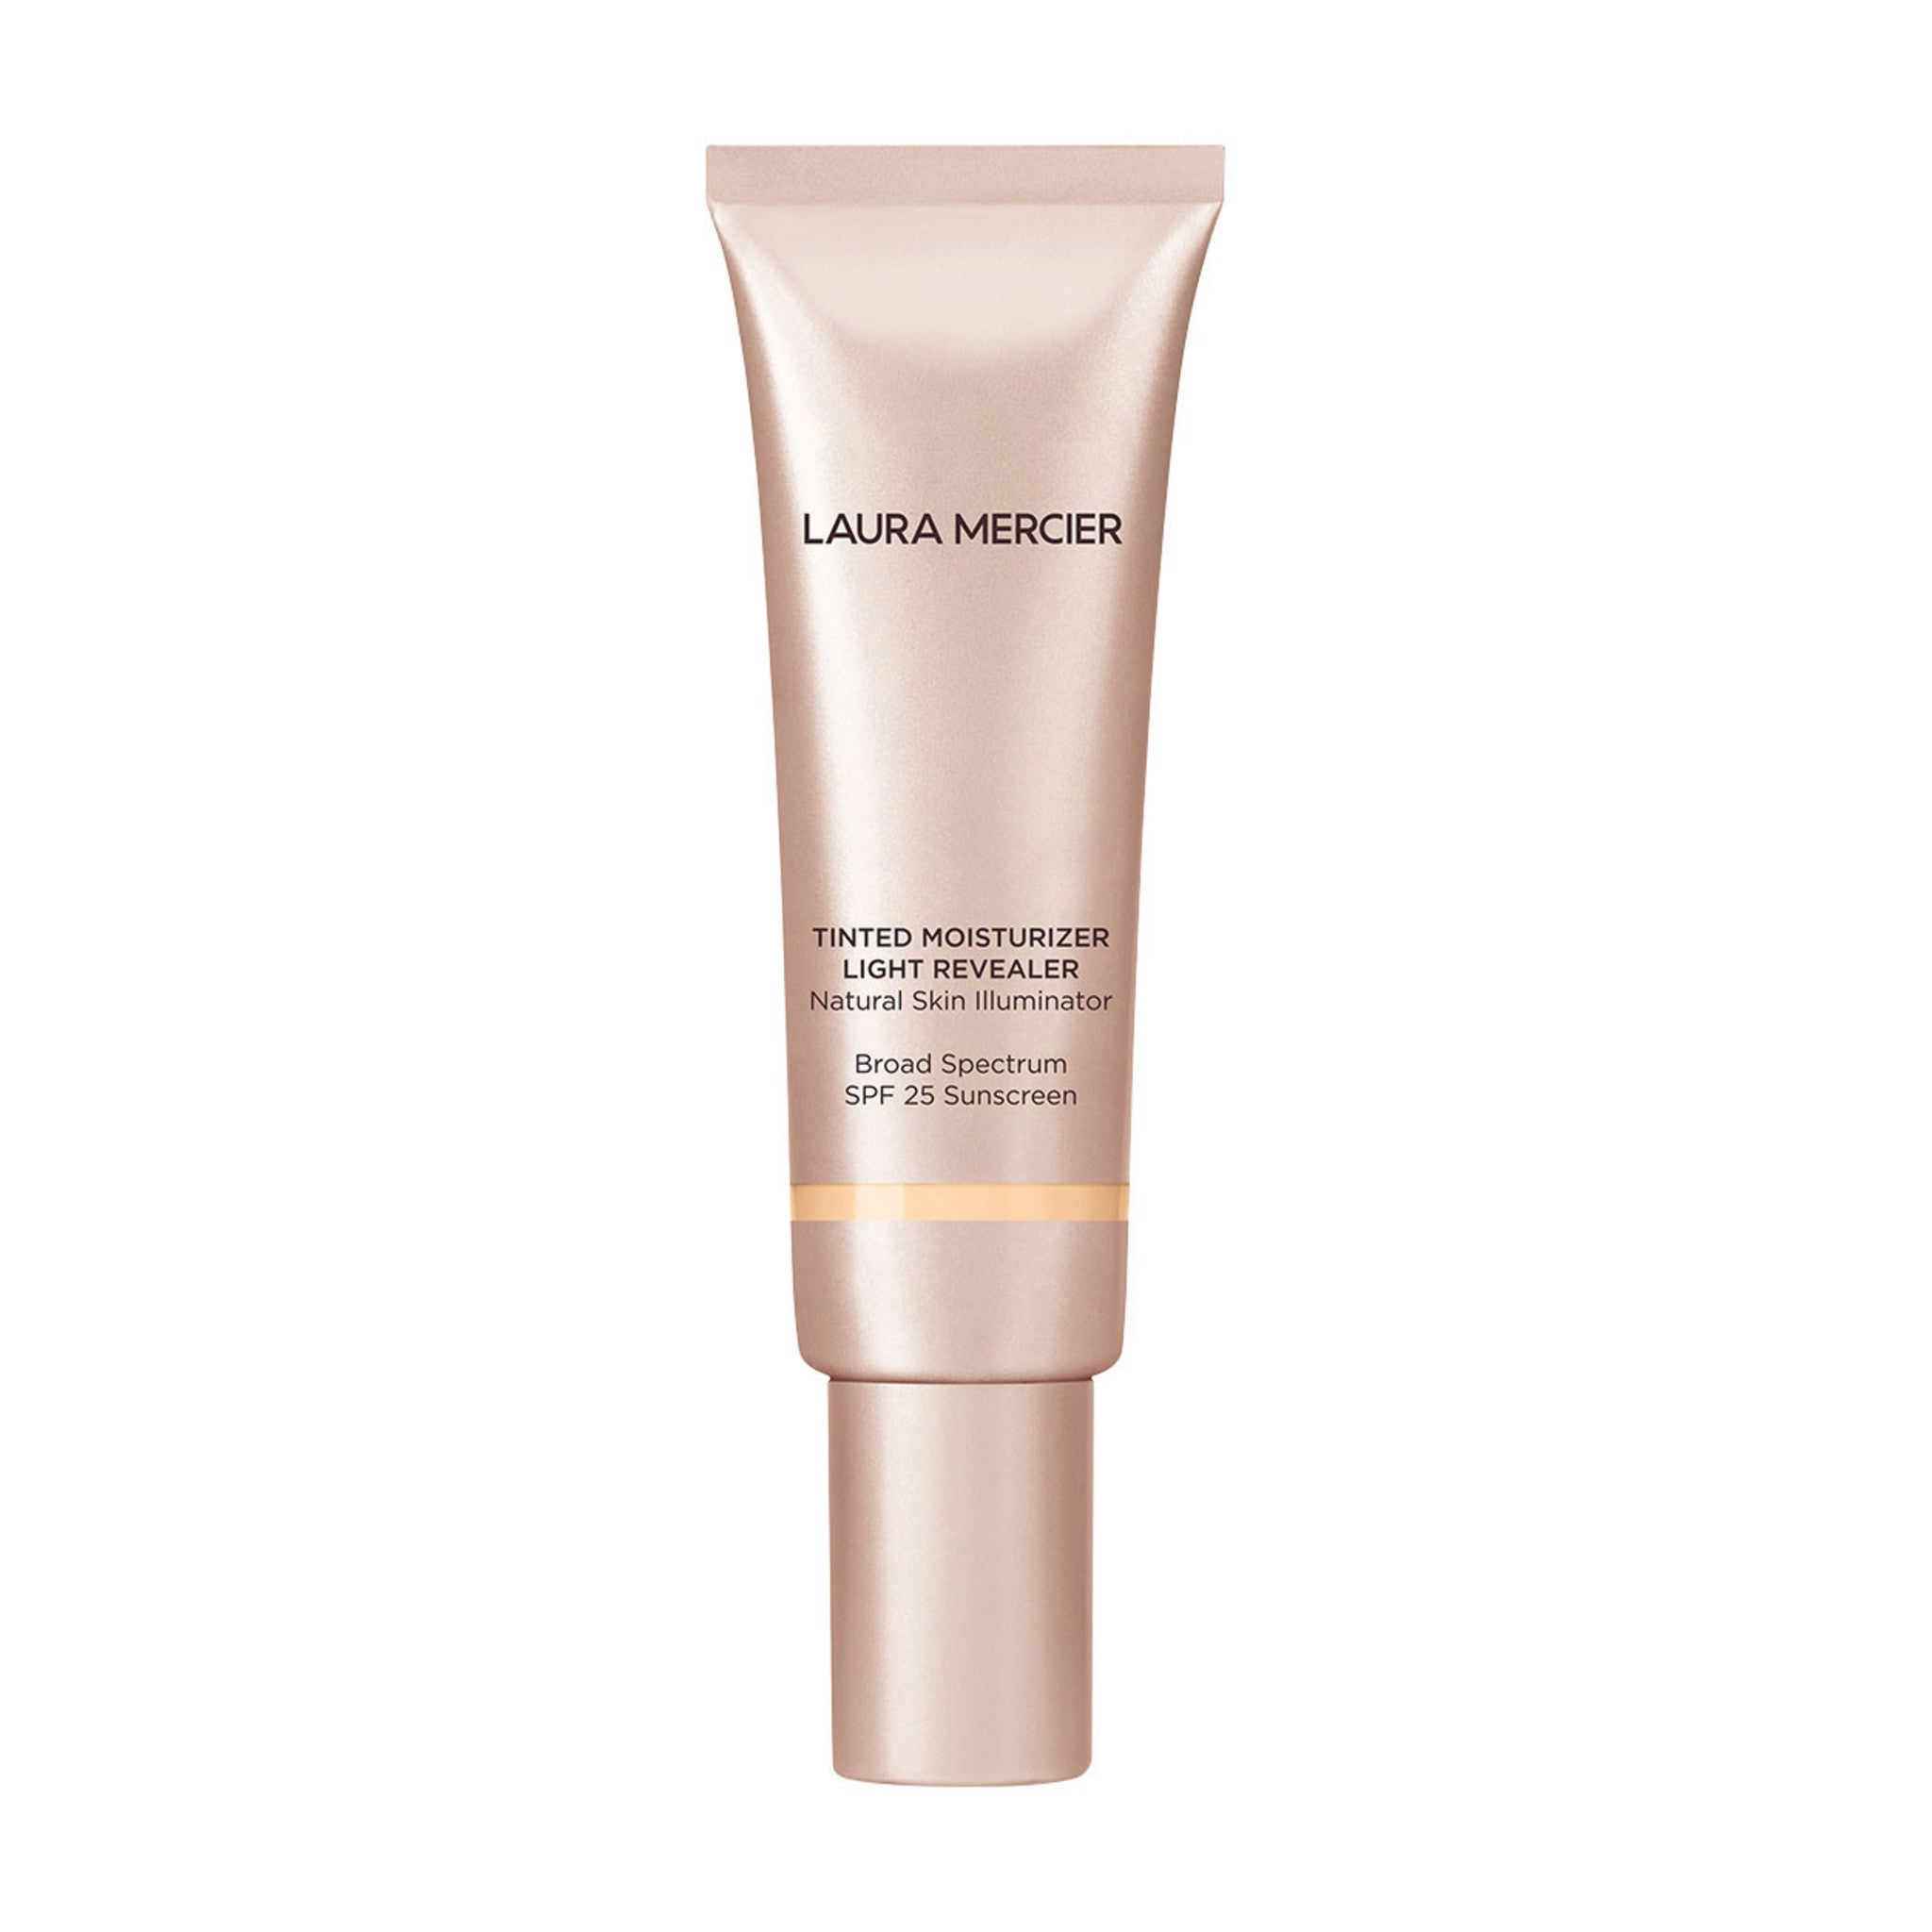 The 16 Best Tinted Moisturizers With SPF, According to Experts and